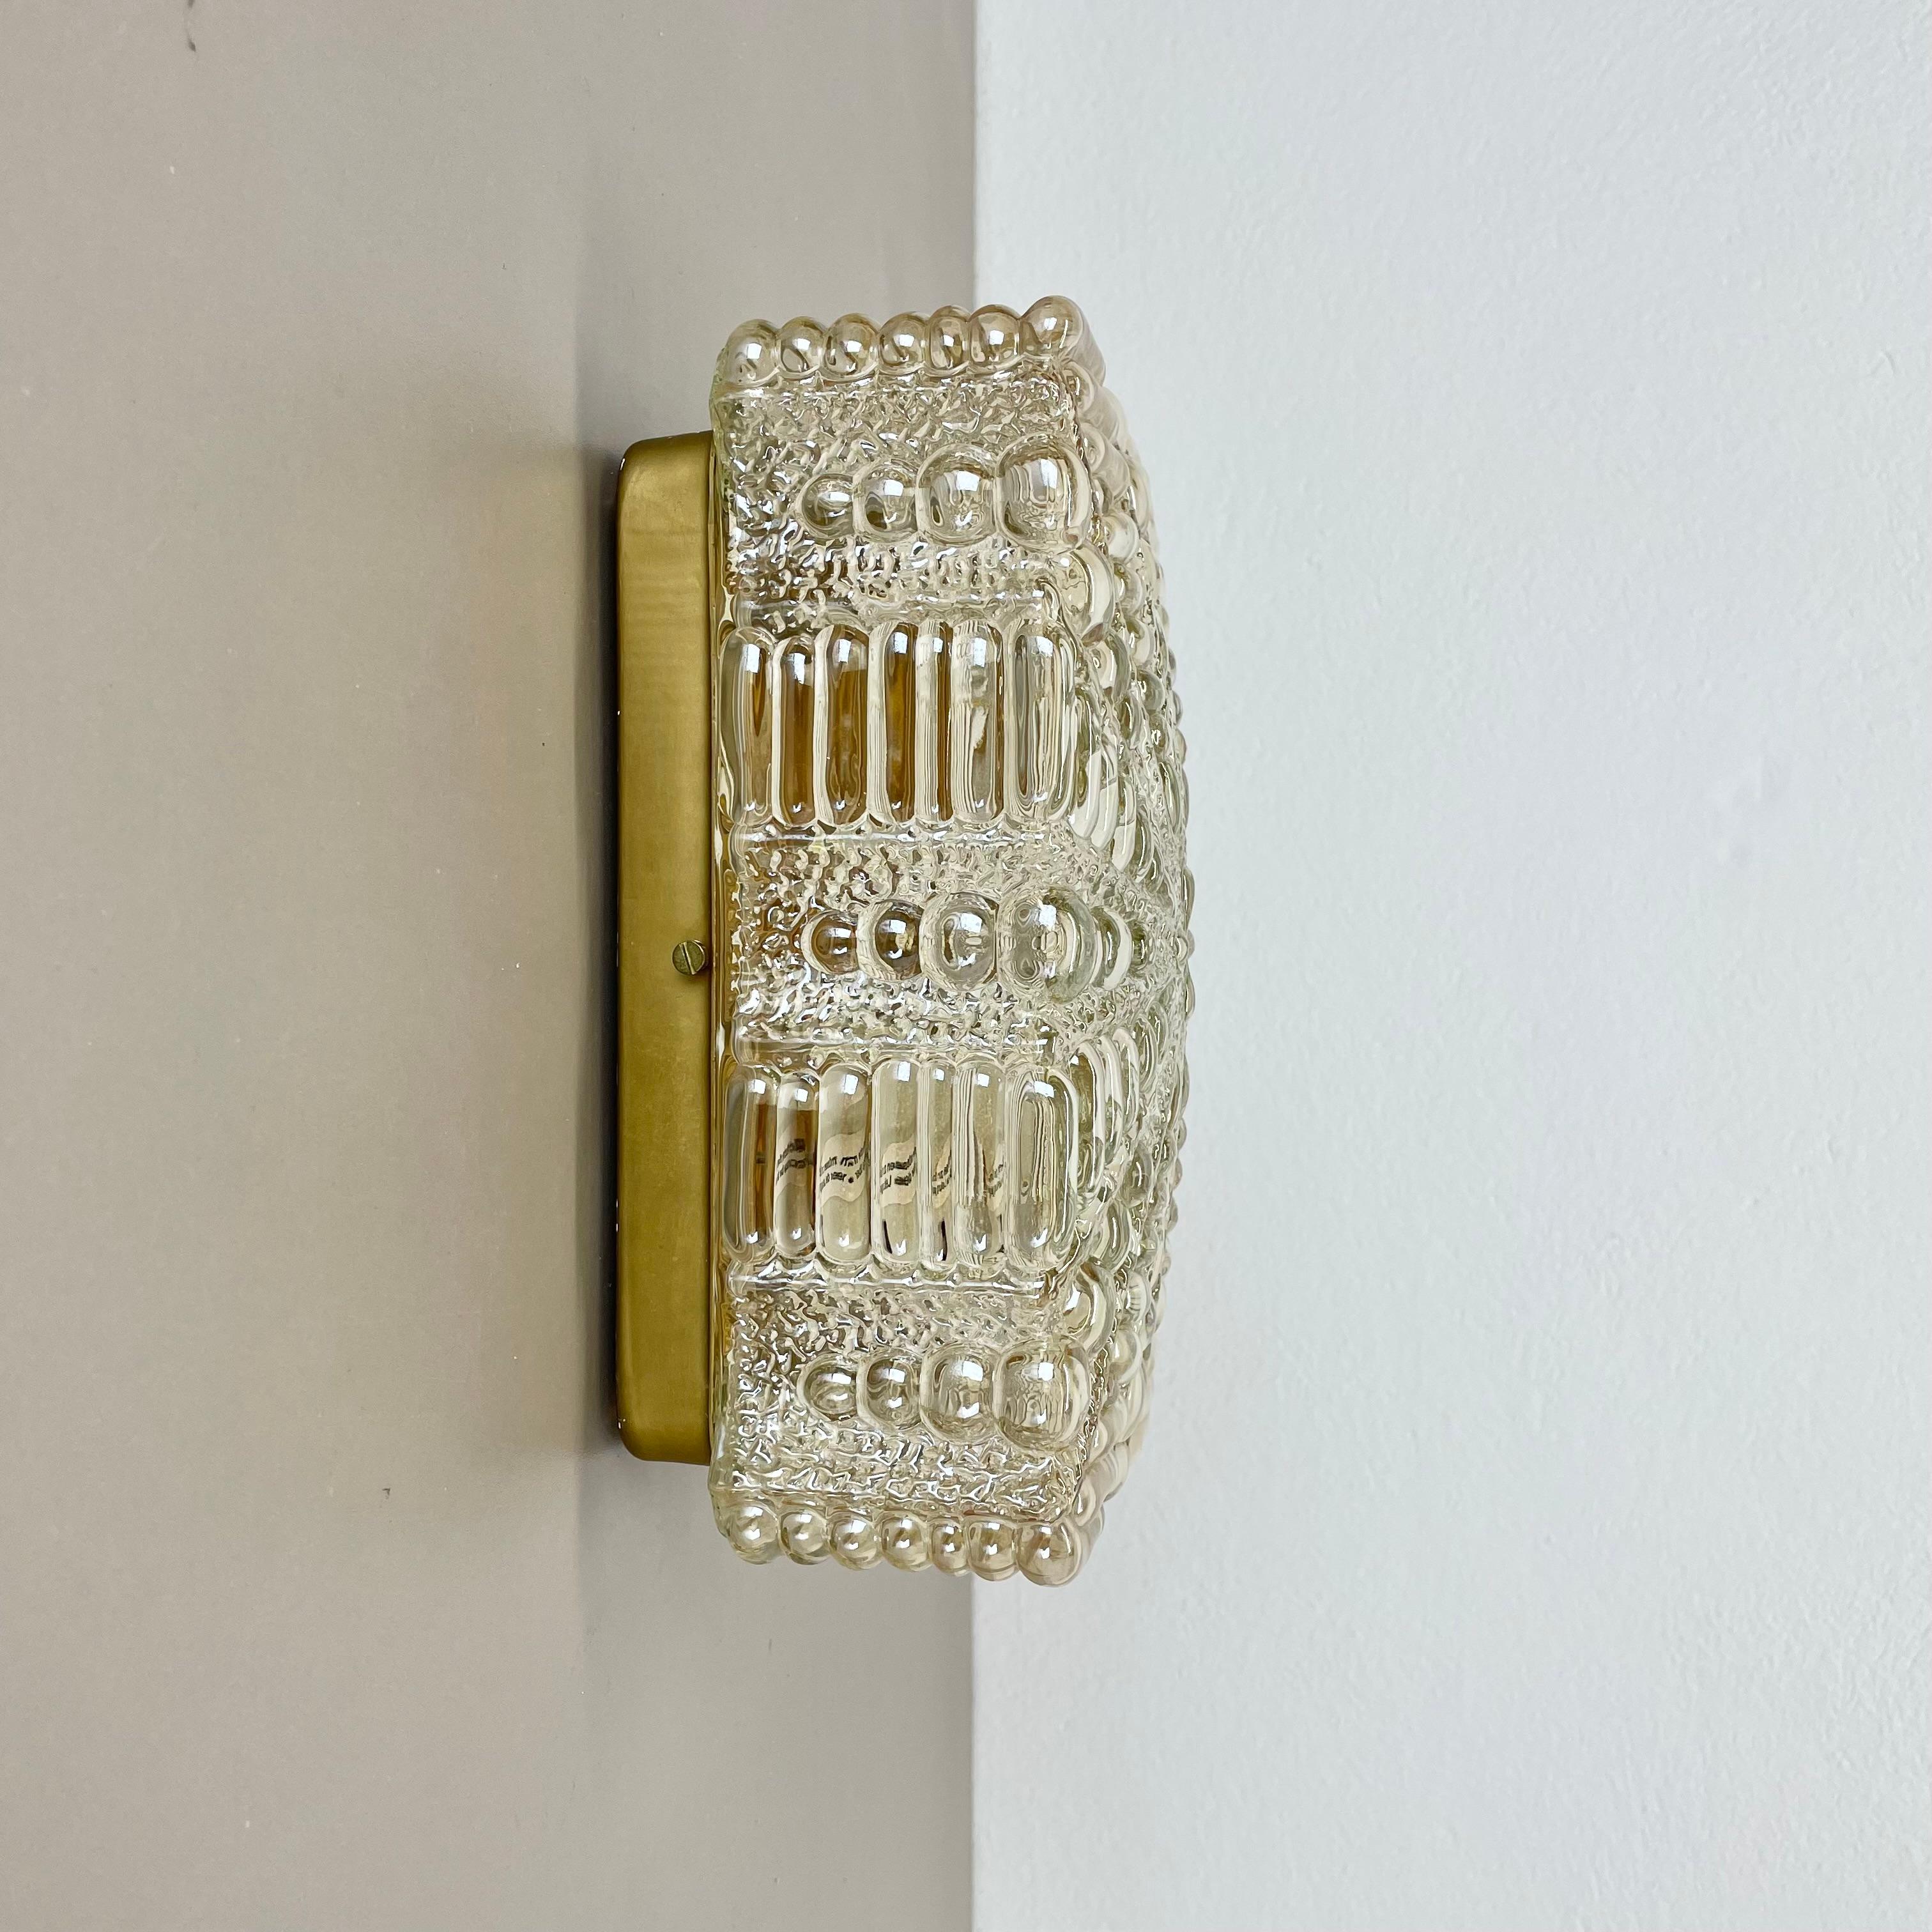 Article:

Wall light sconce


Origin:

Germany


Producer:

RZB LIGHTS (see label inside the light)


Age:

1970s



This original modernist wall light was produced in Germany in the 1970s. It is made from heavy glass and has a metal wall fixation.